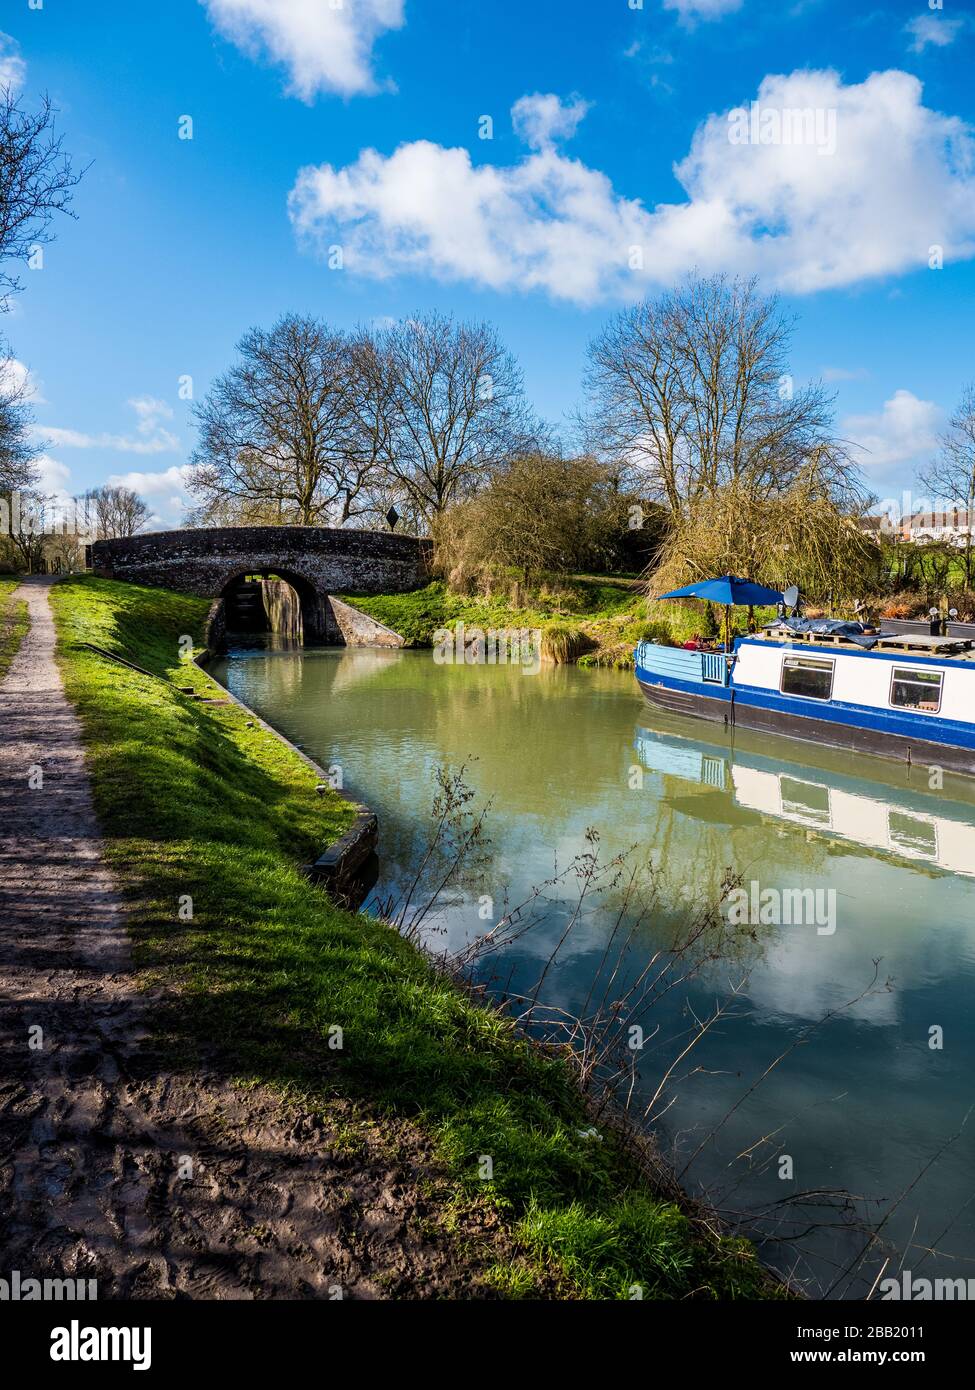 Kennet and Avon Canal, North Wessex Downs, Narrowboat, Great Bedwyn, Wiltshire, England, UK, GB. Stock Photo